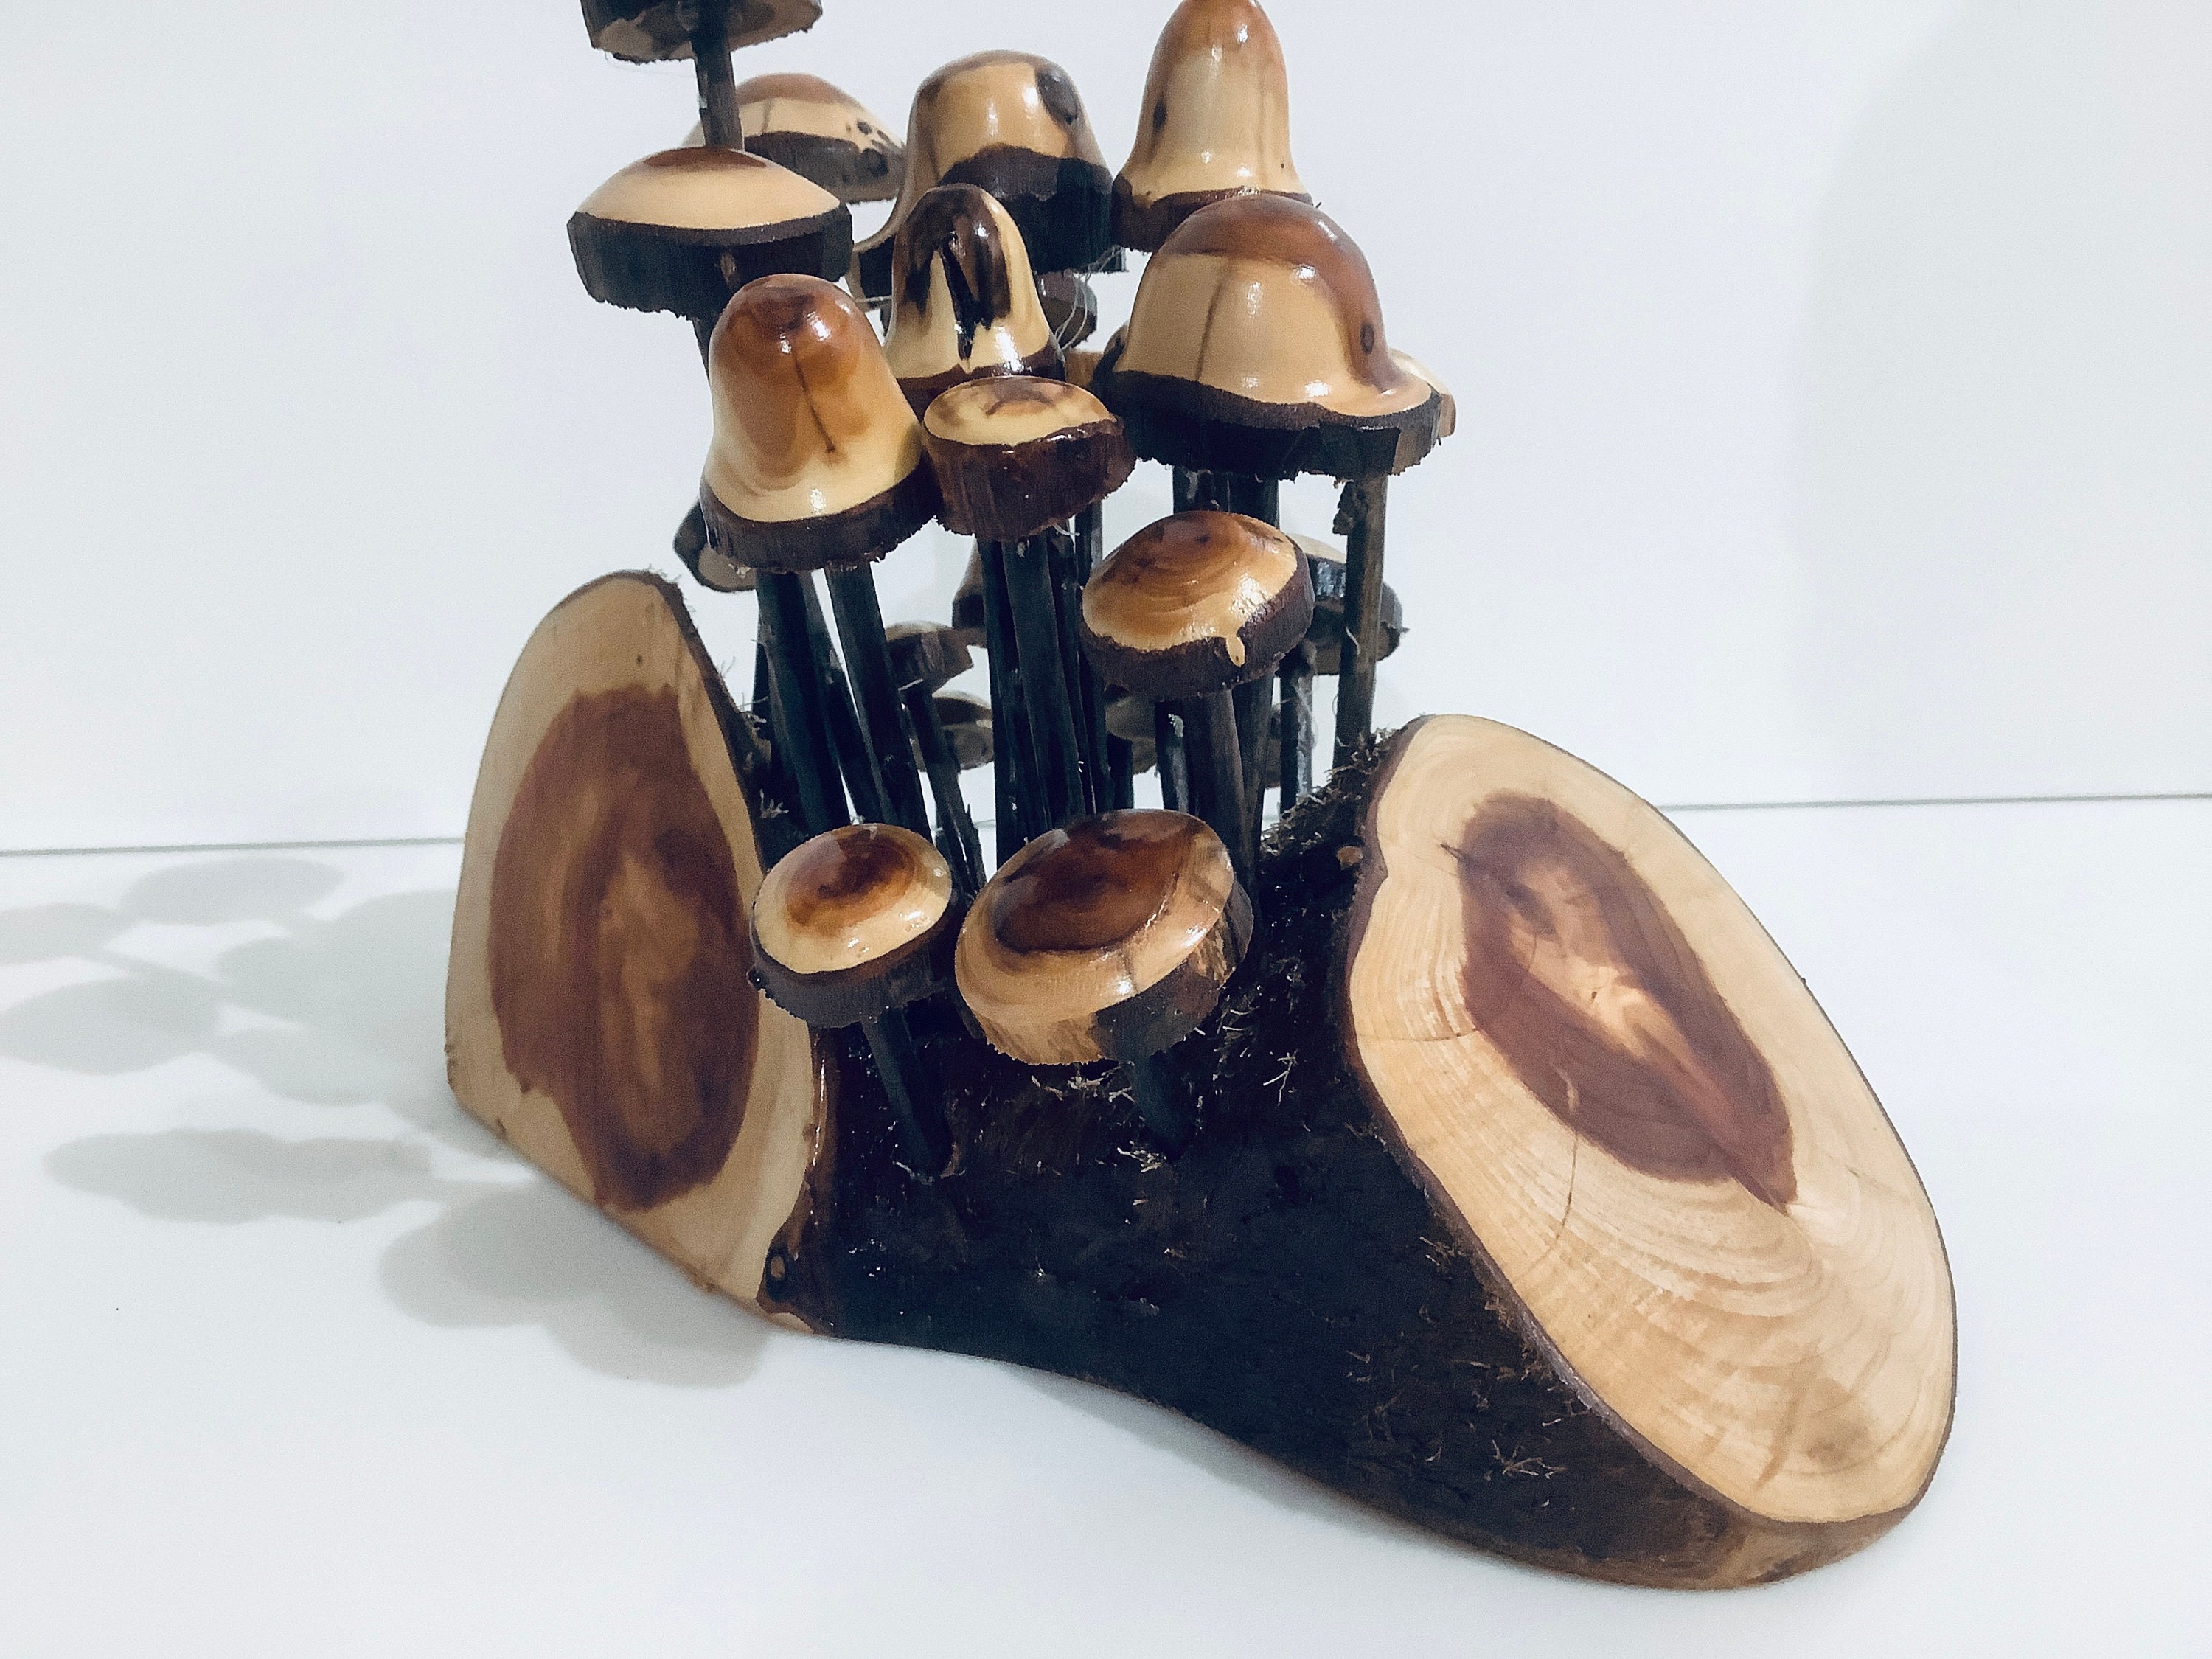 Wooden Turned Mushroom Made From Yew 15 Ornamental Fungi Sculpture